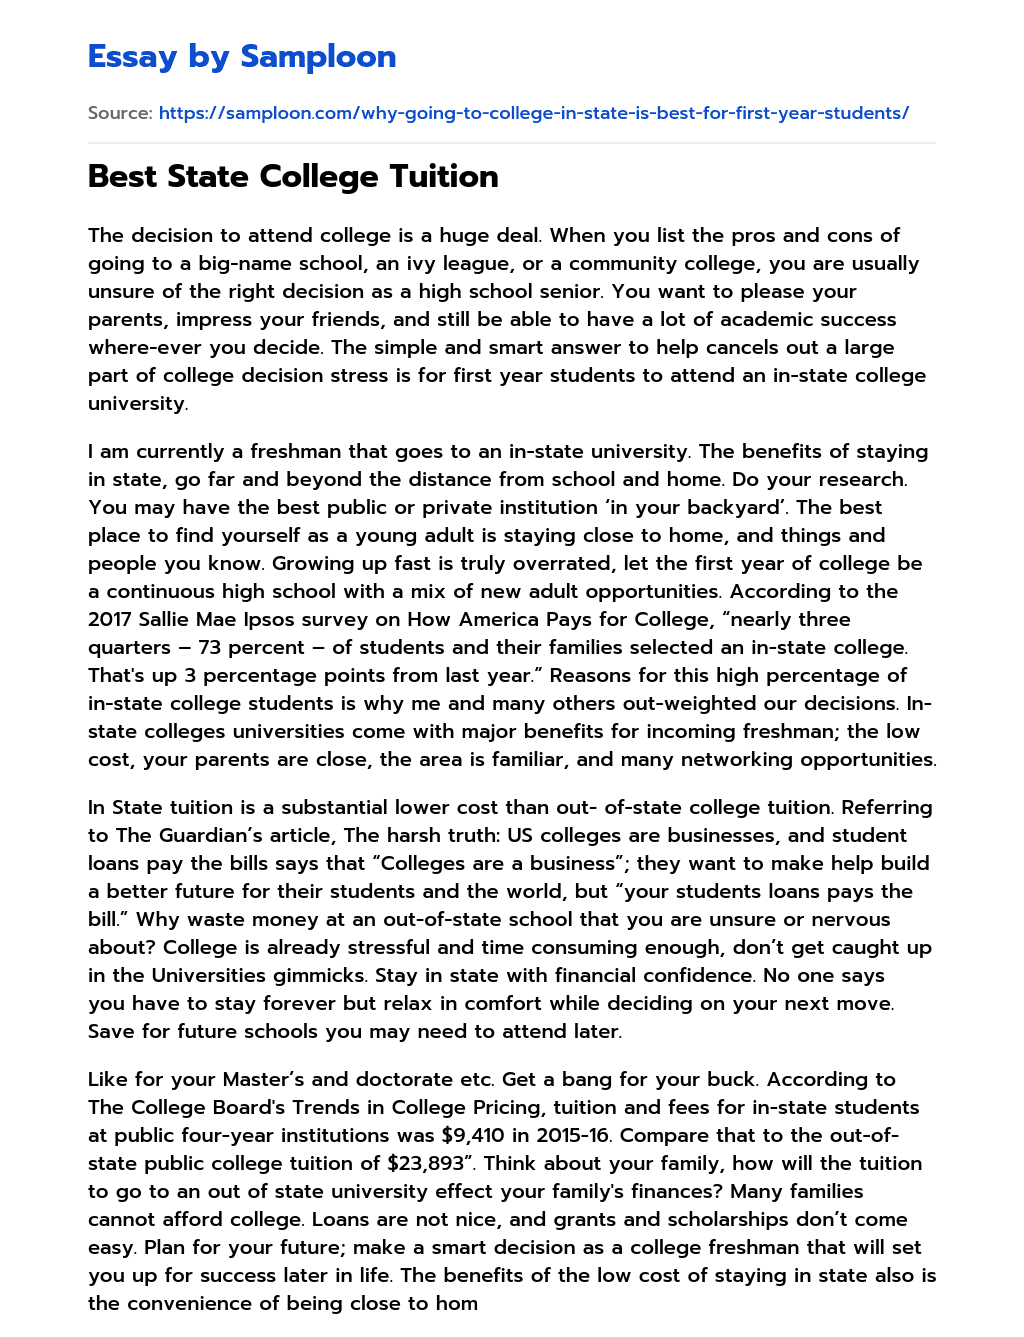 Best State College Tuition essay